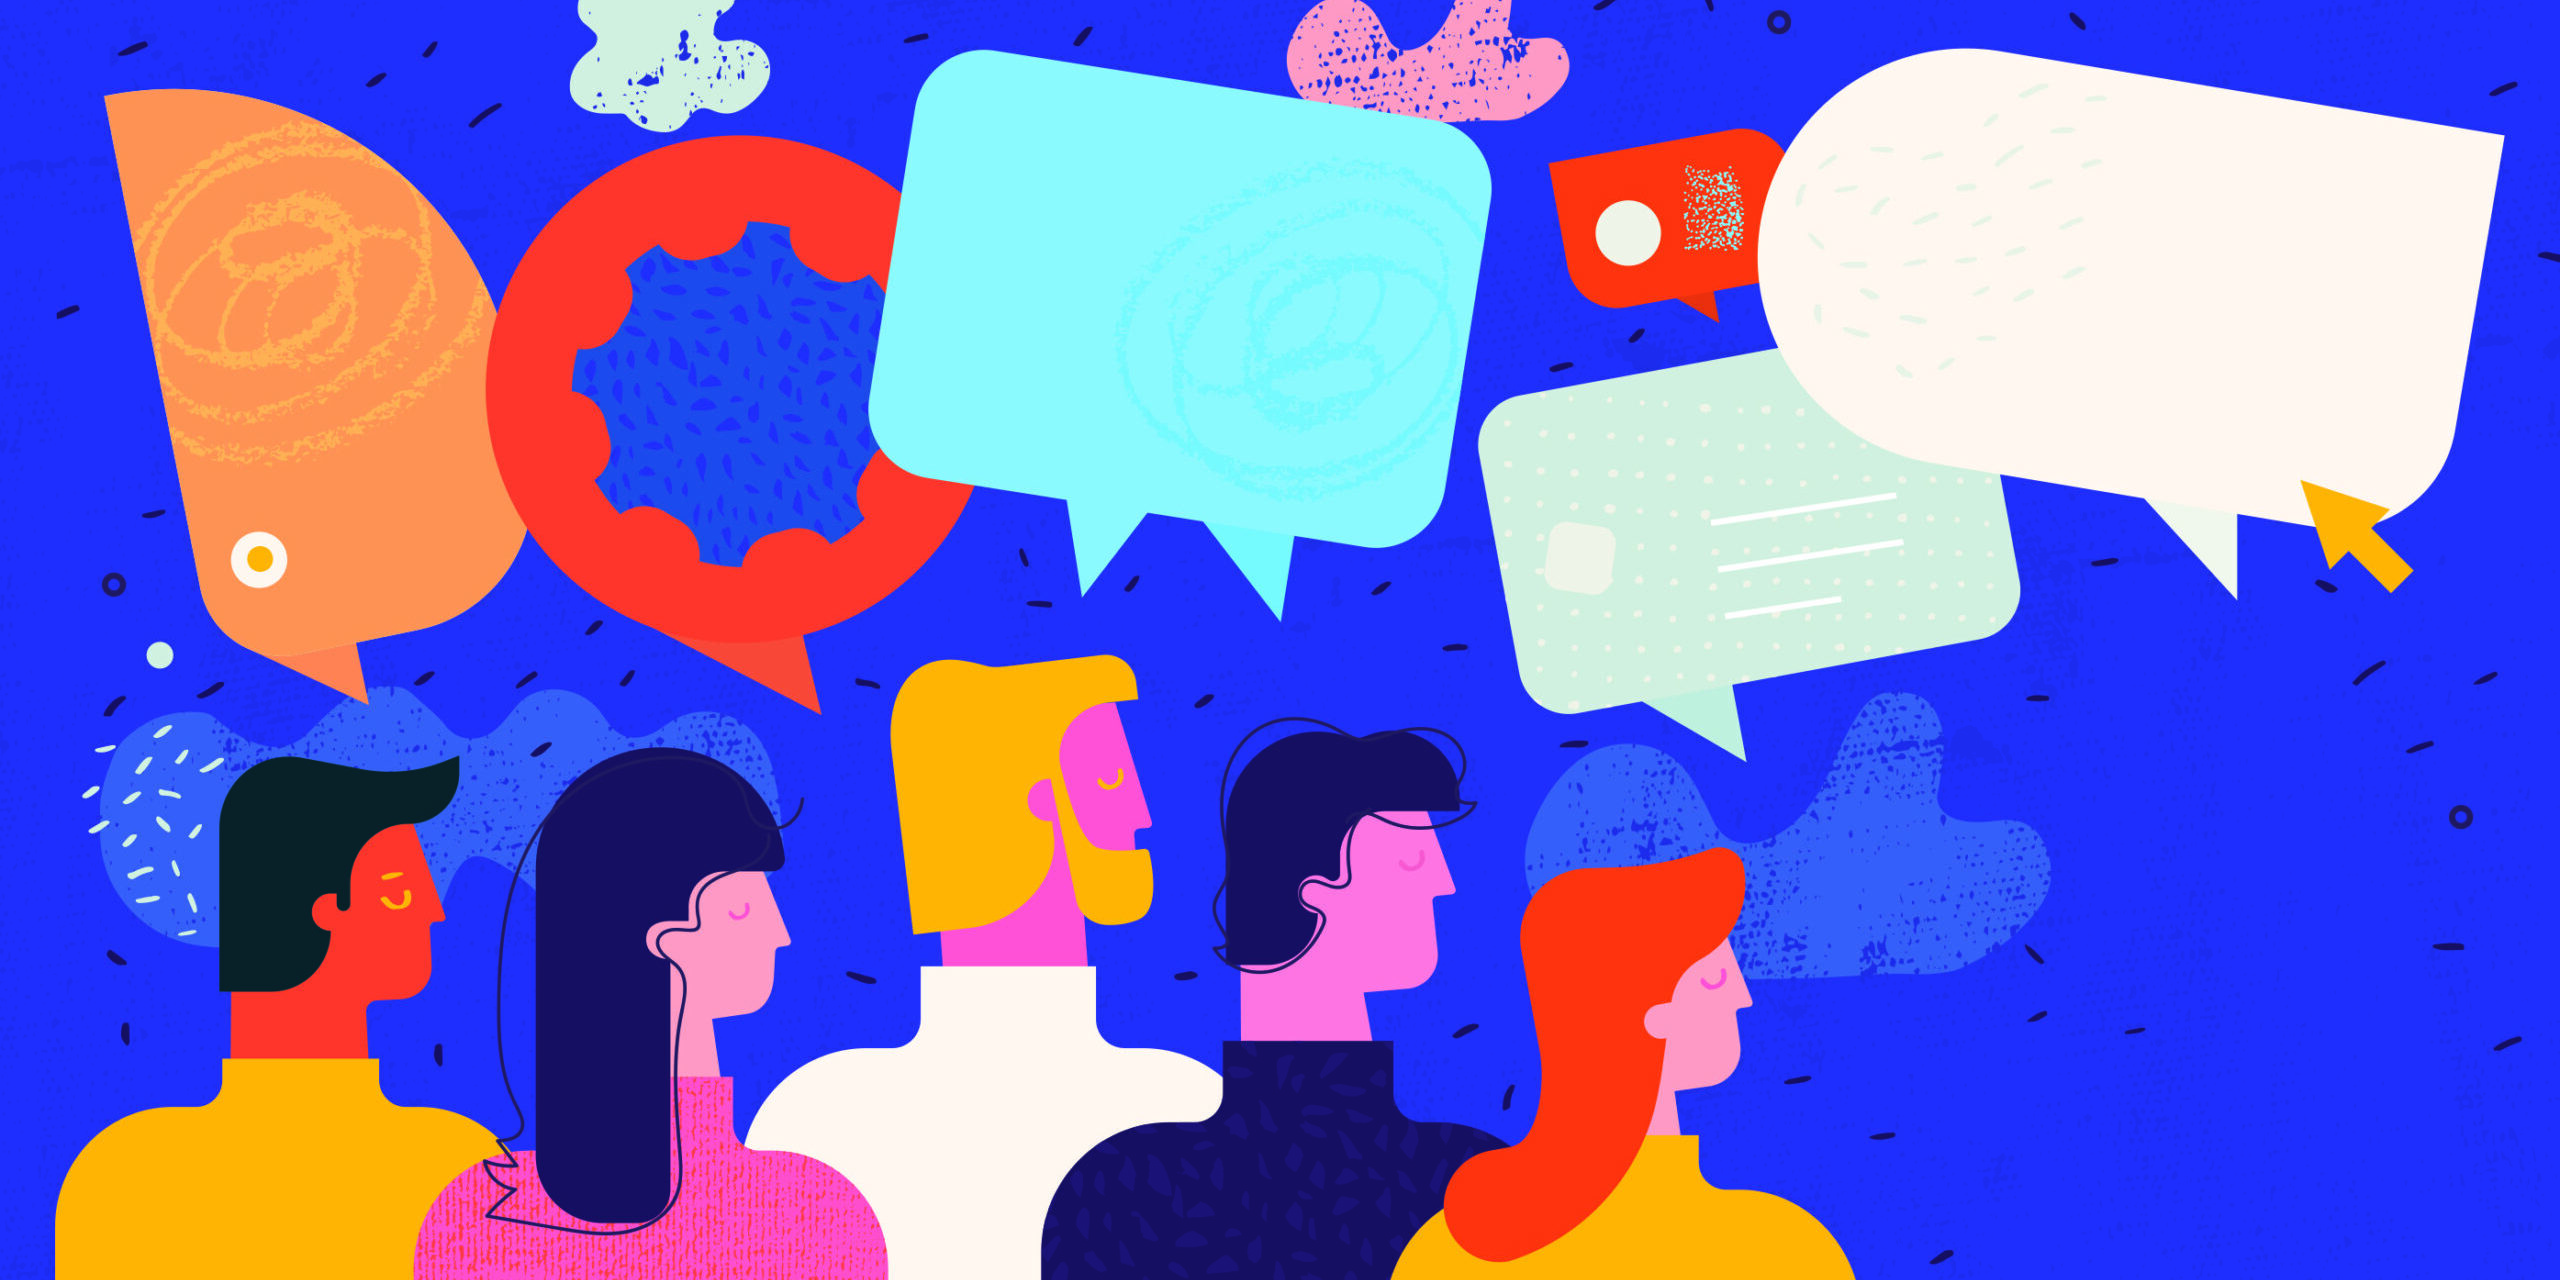 Colorful illustration of people on a blue background with speech bubbles above their heads.